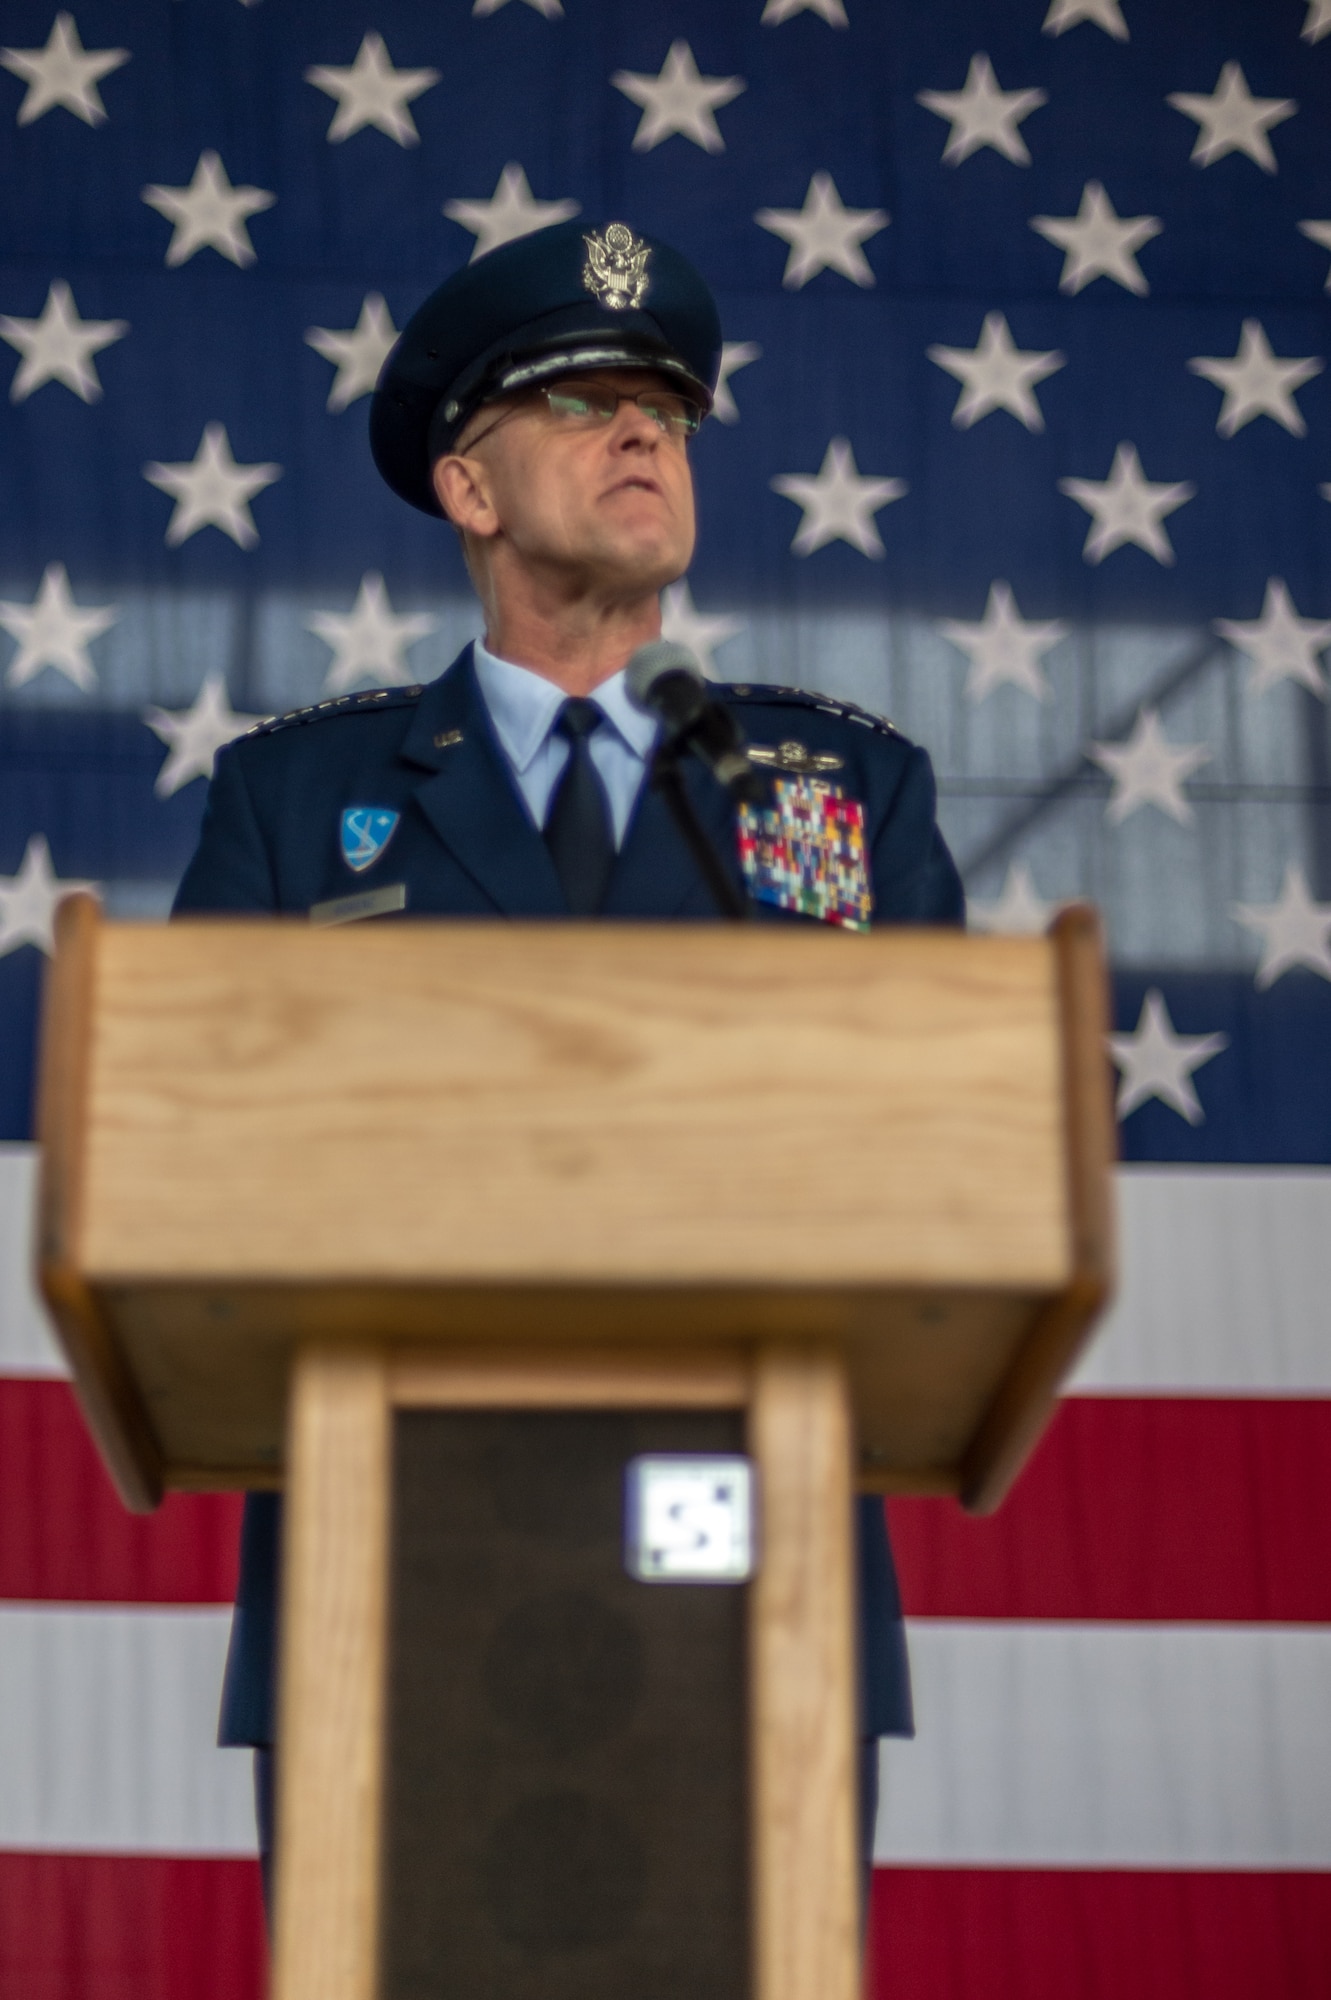 Gen. Frank Gorenc, U.S. Air Forces in Europe and Air Force Africa commander, speaks about the new 3rd Air Force commander, Lt. Gen. Darryl Roberson, and his accomplishments during the 3rd Air Force assumption of command ceremony June 11, 2014, Ramstein Air Base, Germany. Roberson comes to 3rd Air Force from his previous assignment as the vice director of operations on the joint staff in Washington, D.C. The command provides full-spectrum Air Force war-fighting capabilities throughout an area of responsibility that spans three continents and encompasses 104 countries. (U.S. Air Force photo/ Airman 1st Class Jordan Castelan)